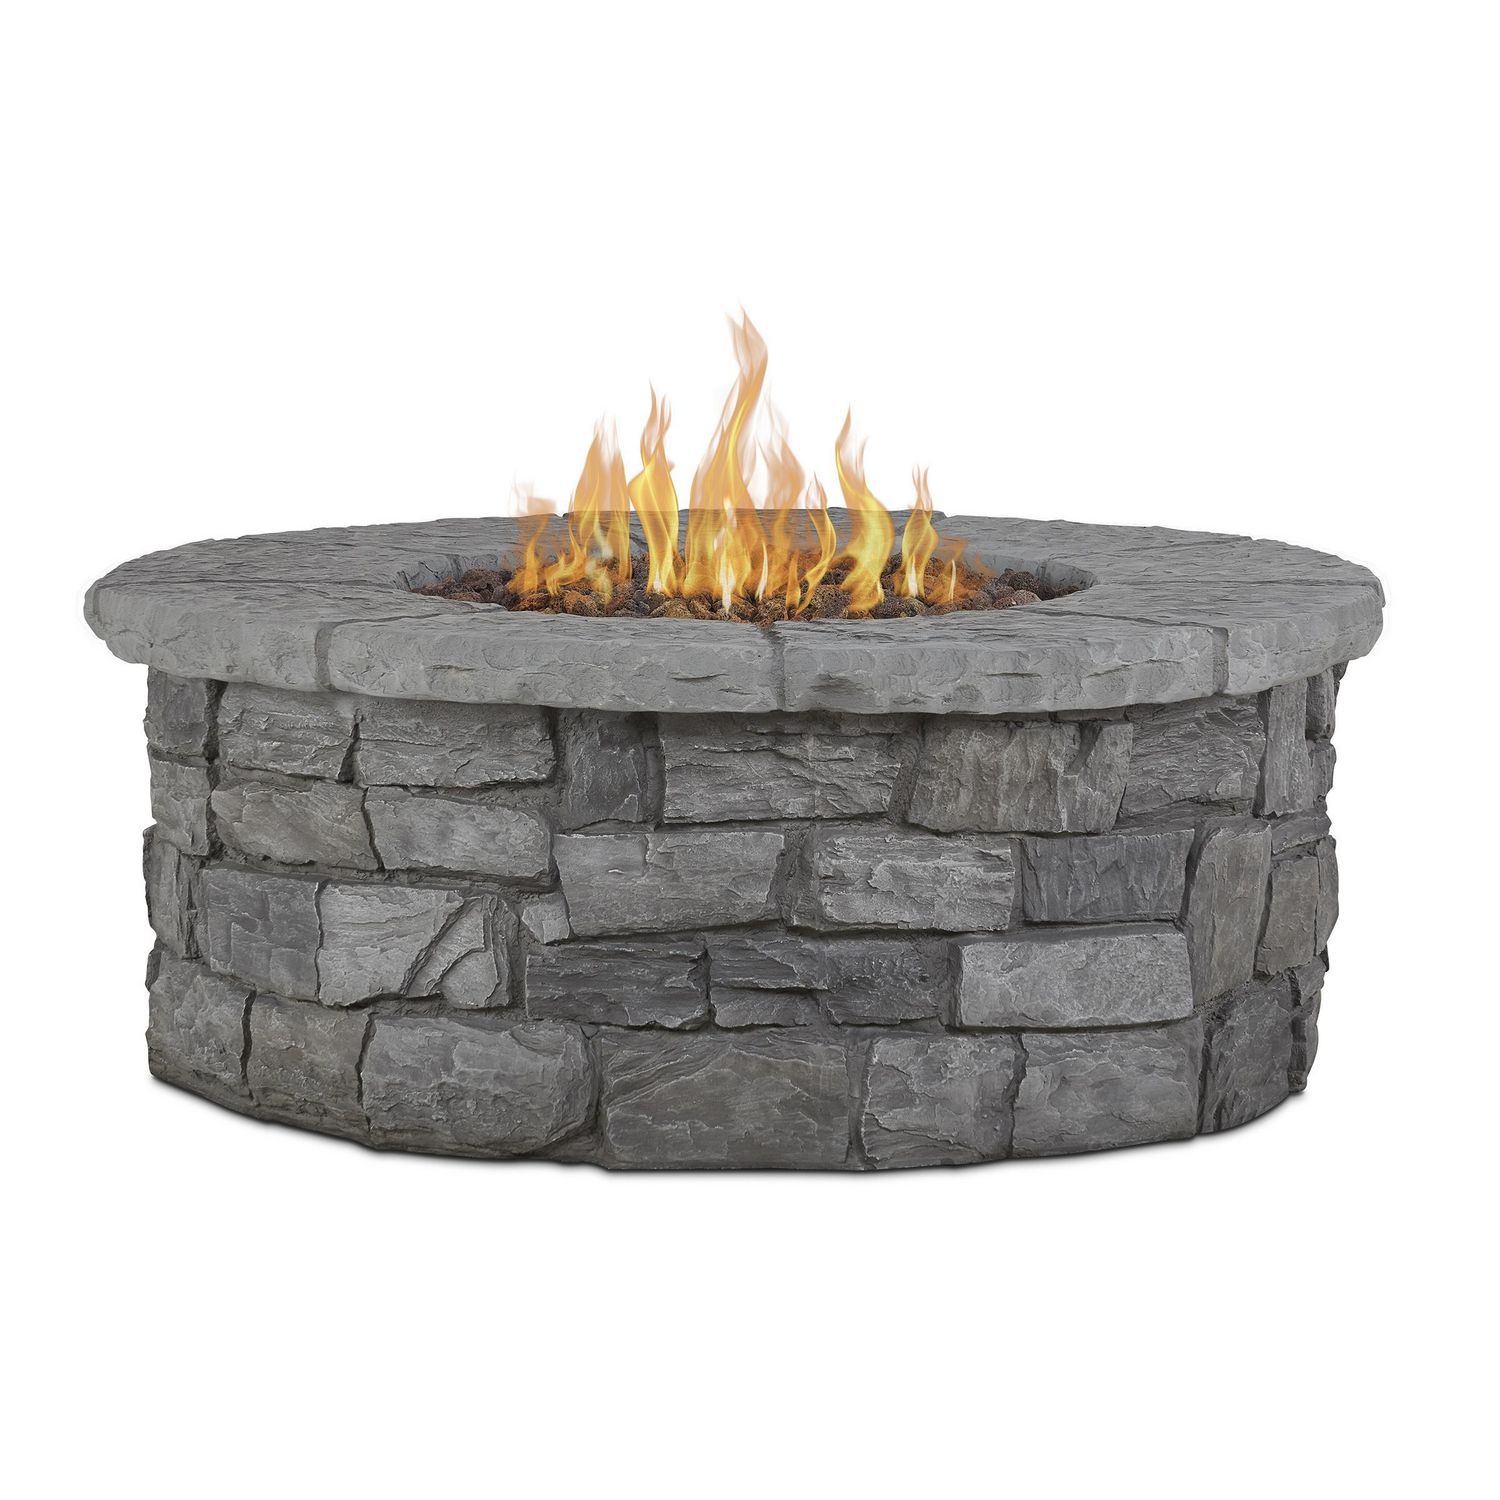 Sedona Round Propane Fire Table In Gray, Convert Fire Pit To Natural Gas